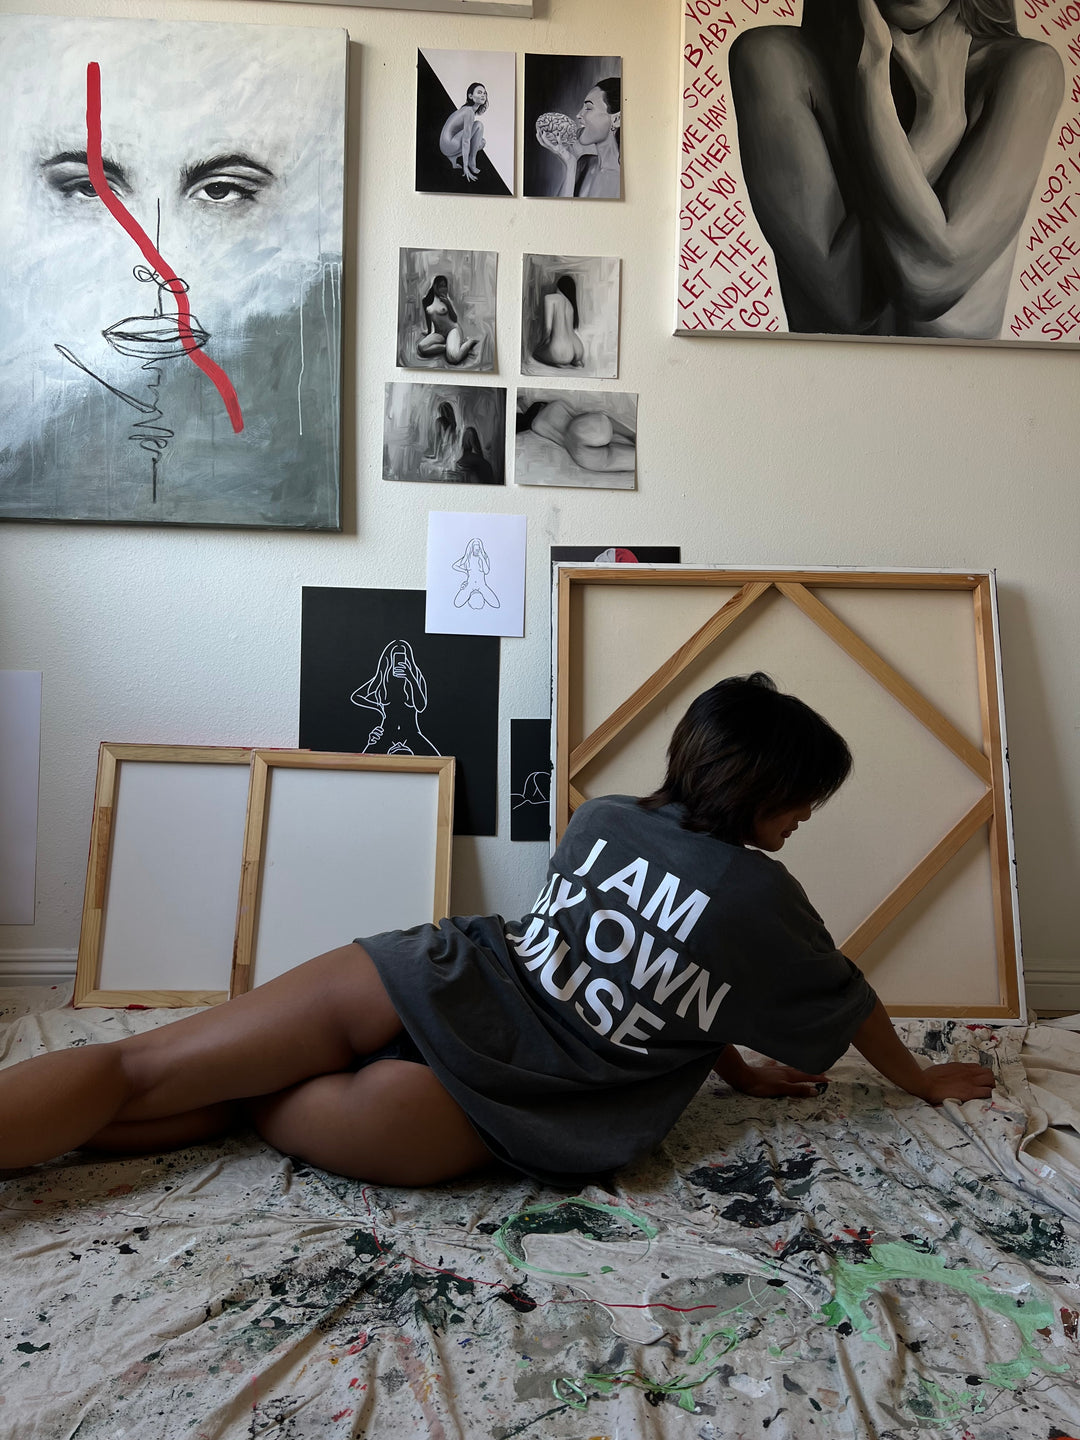 'I AM MY OWN MUSE' Tee